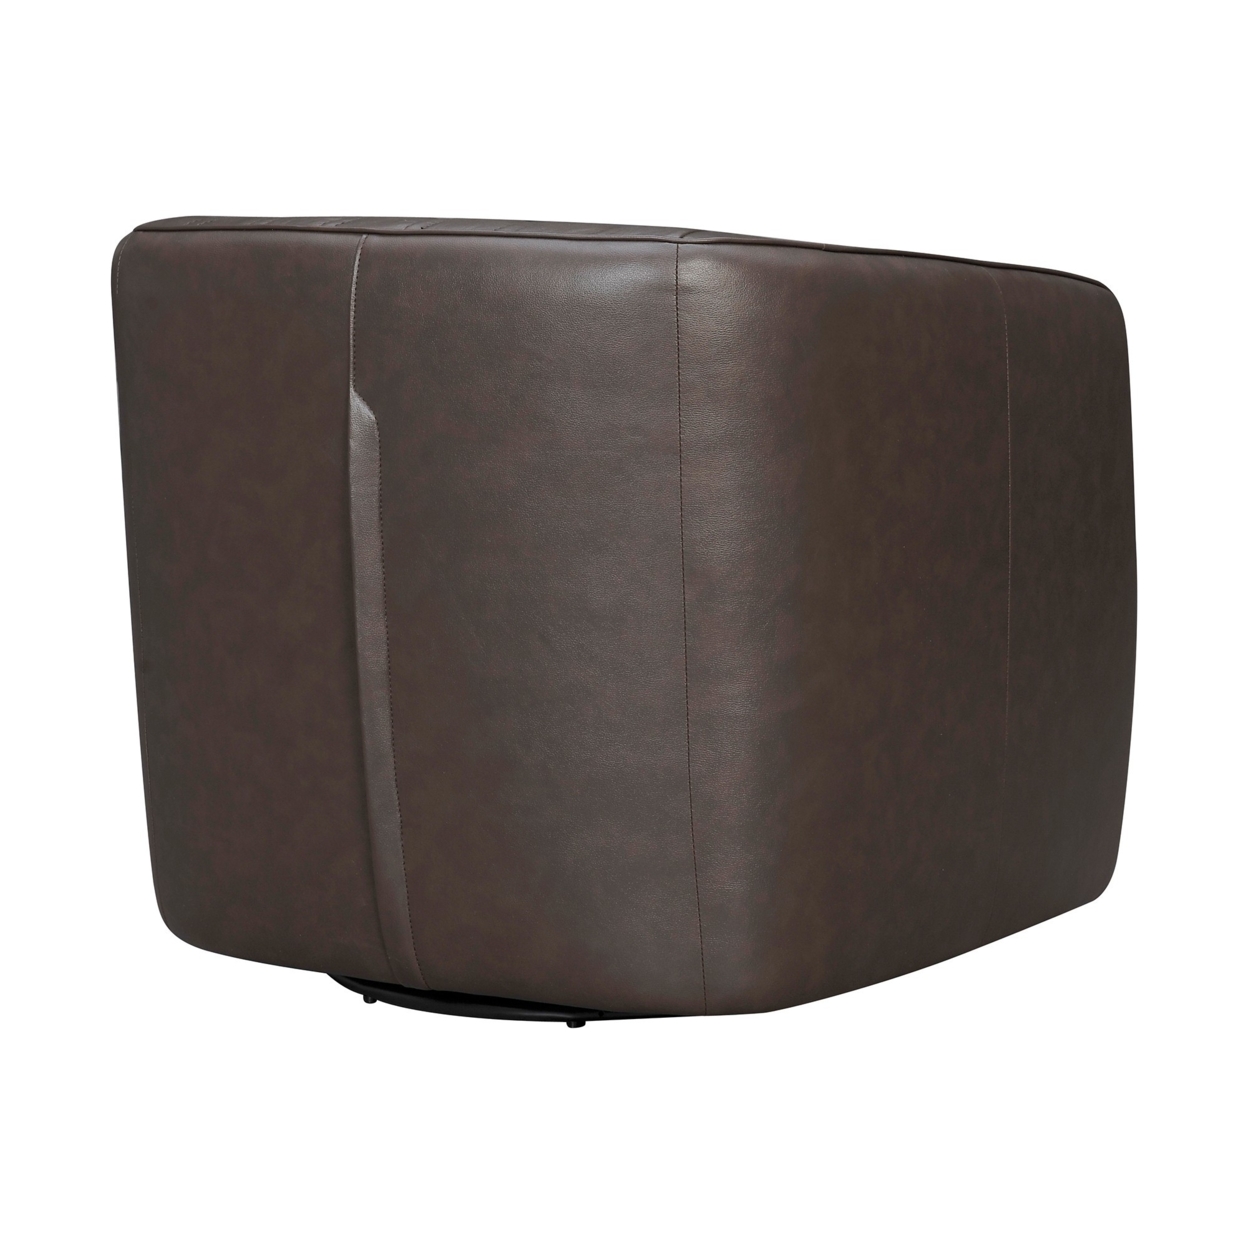 Leather Swivel Barrel Chair With Stitched Details, Brown- Saltoro Sherpi